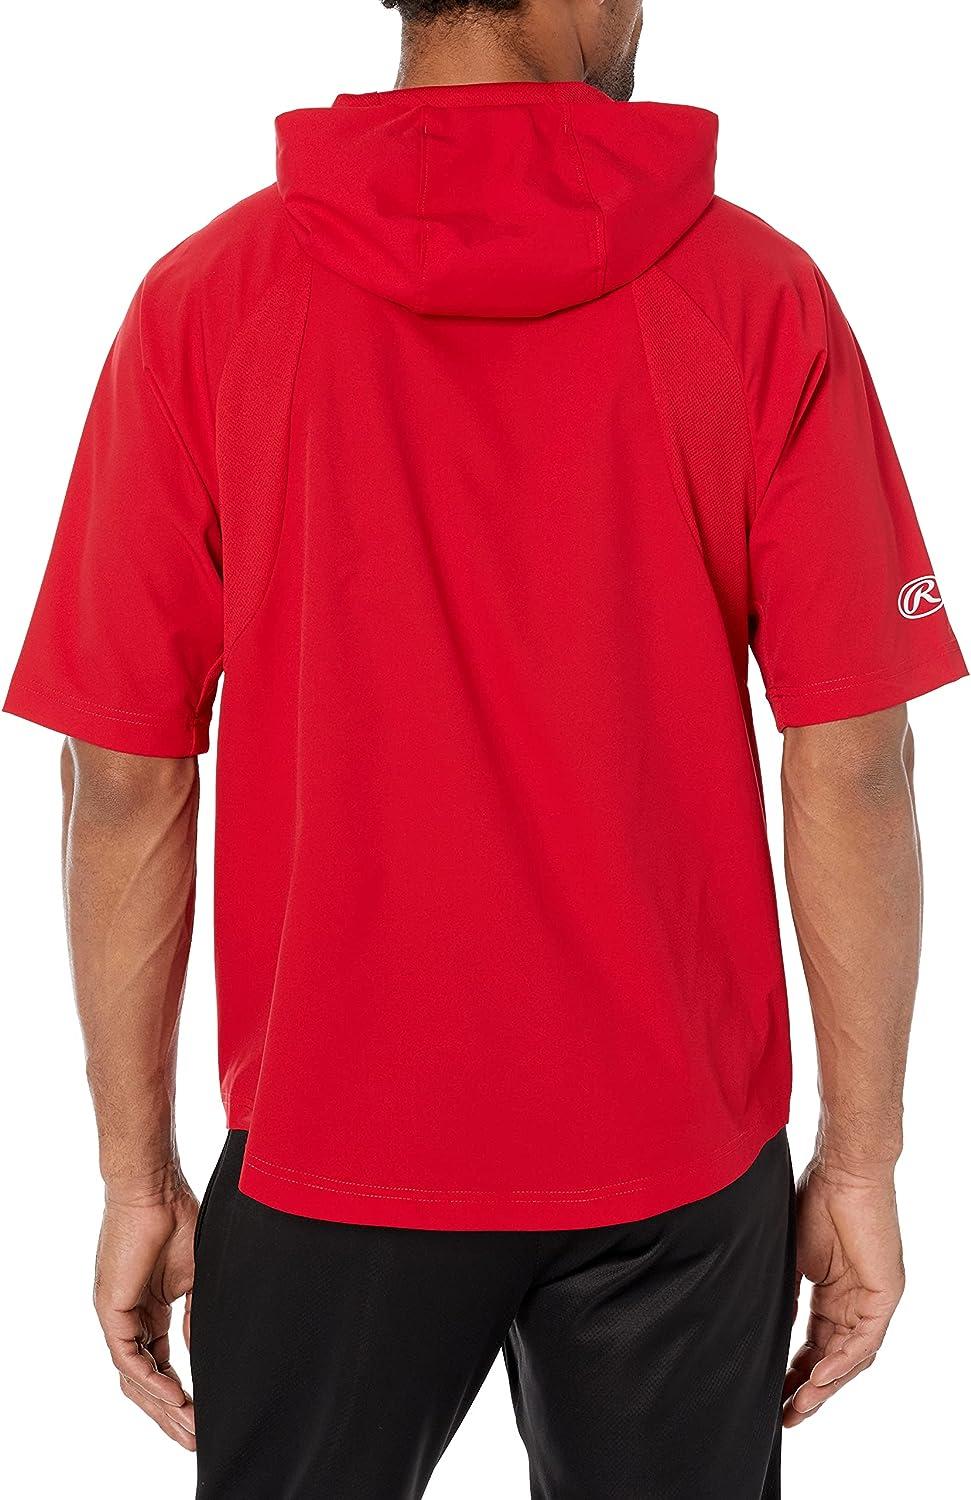 Rawlings Color Sync Adult Men's Short Sleeve Cage Jacket Large Red